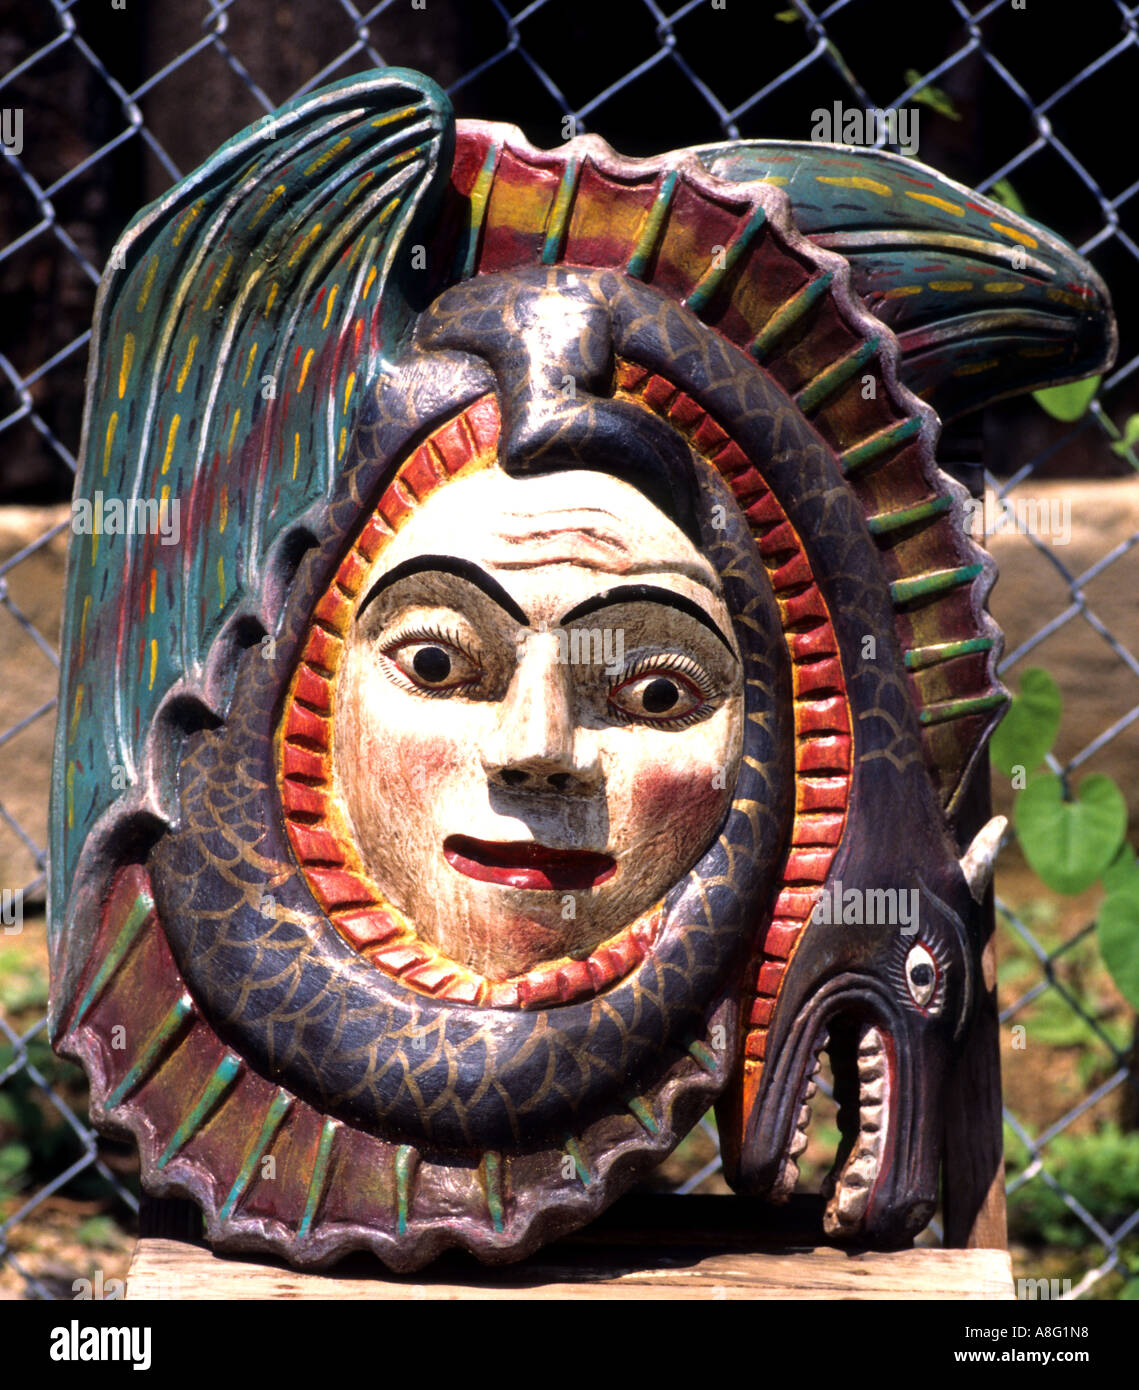 Mexico mexican Mask masquerade pageant folkloric folkloristic Stock Photo